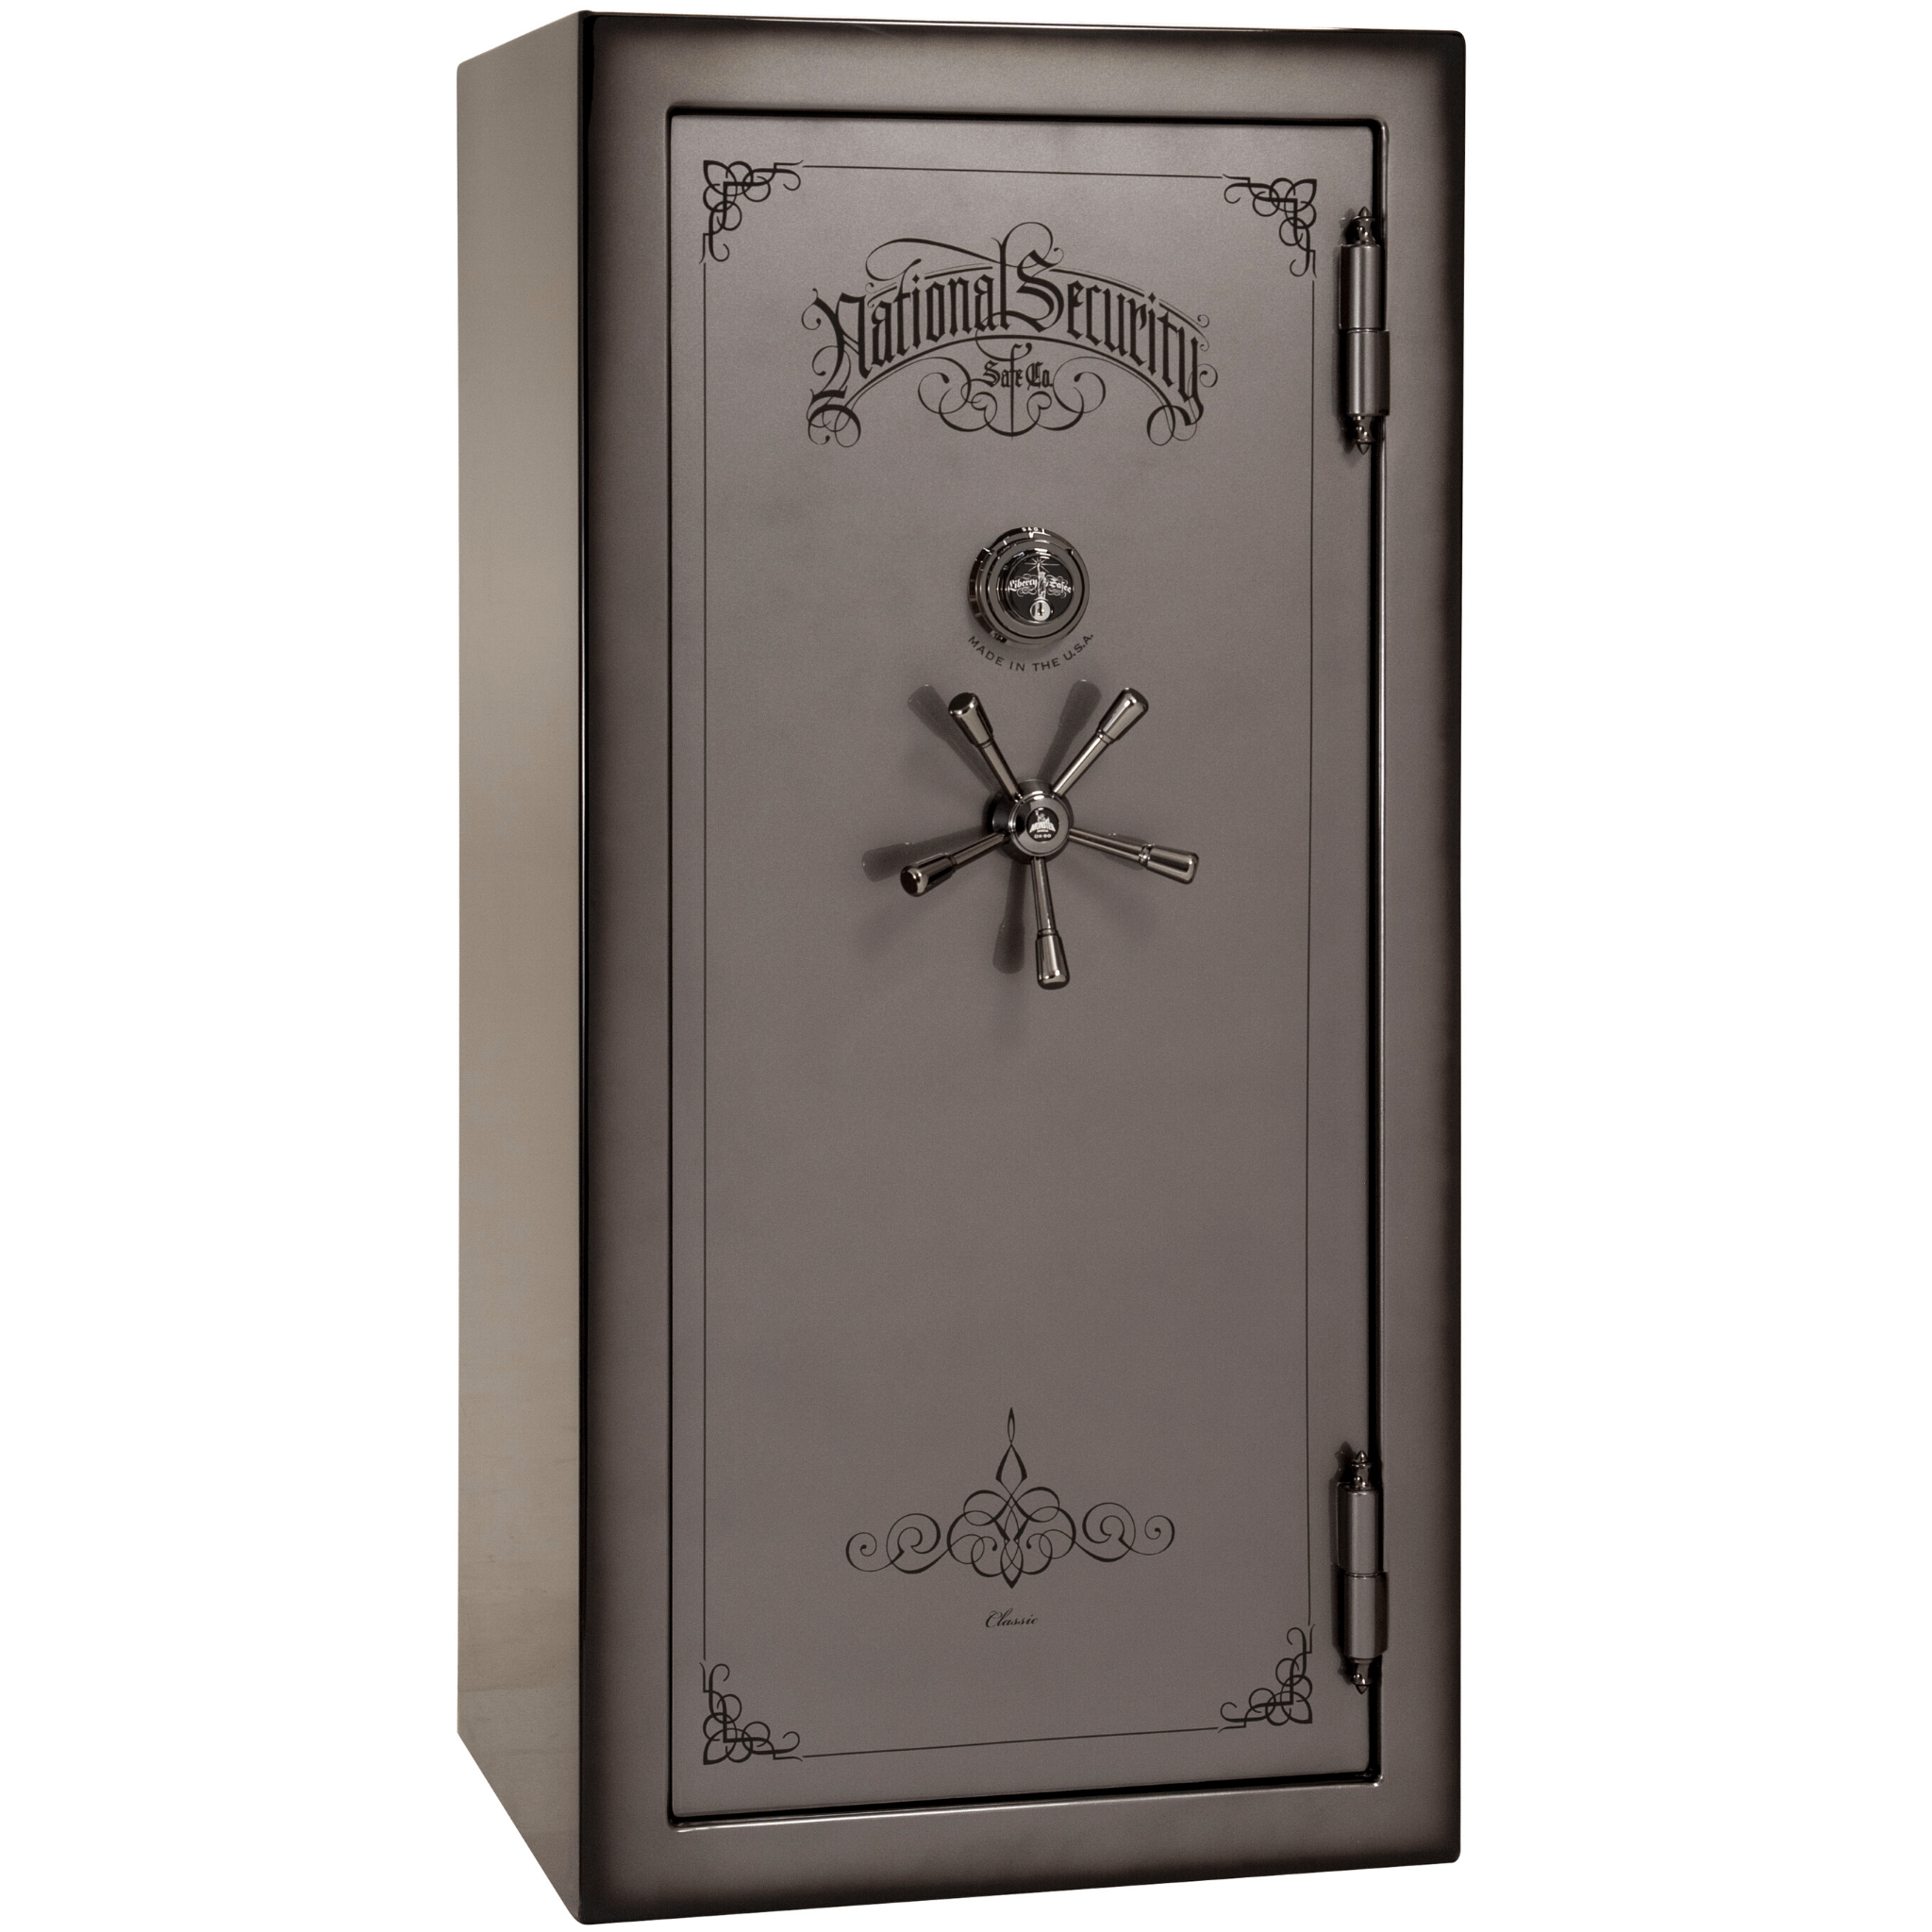 Classic Plus Series | Level 7 Security | 110 Minute Fire Protection | 40 | DIMENSIONS: 66.5"(H) X 36"(W) X 32"(D) | Champagne 2 Tone | Mechanical Lock, photo 23